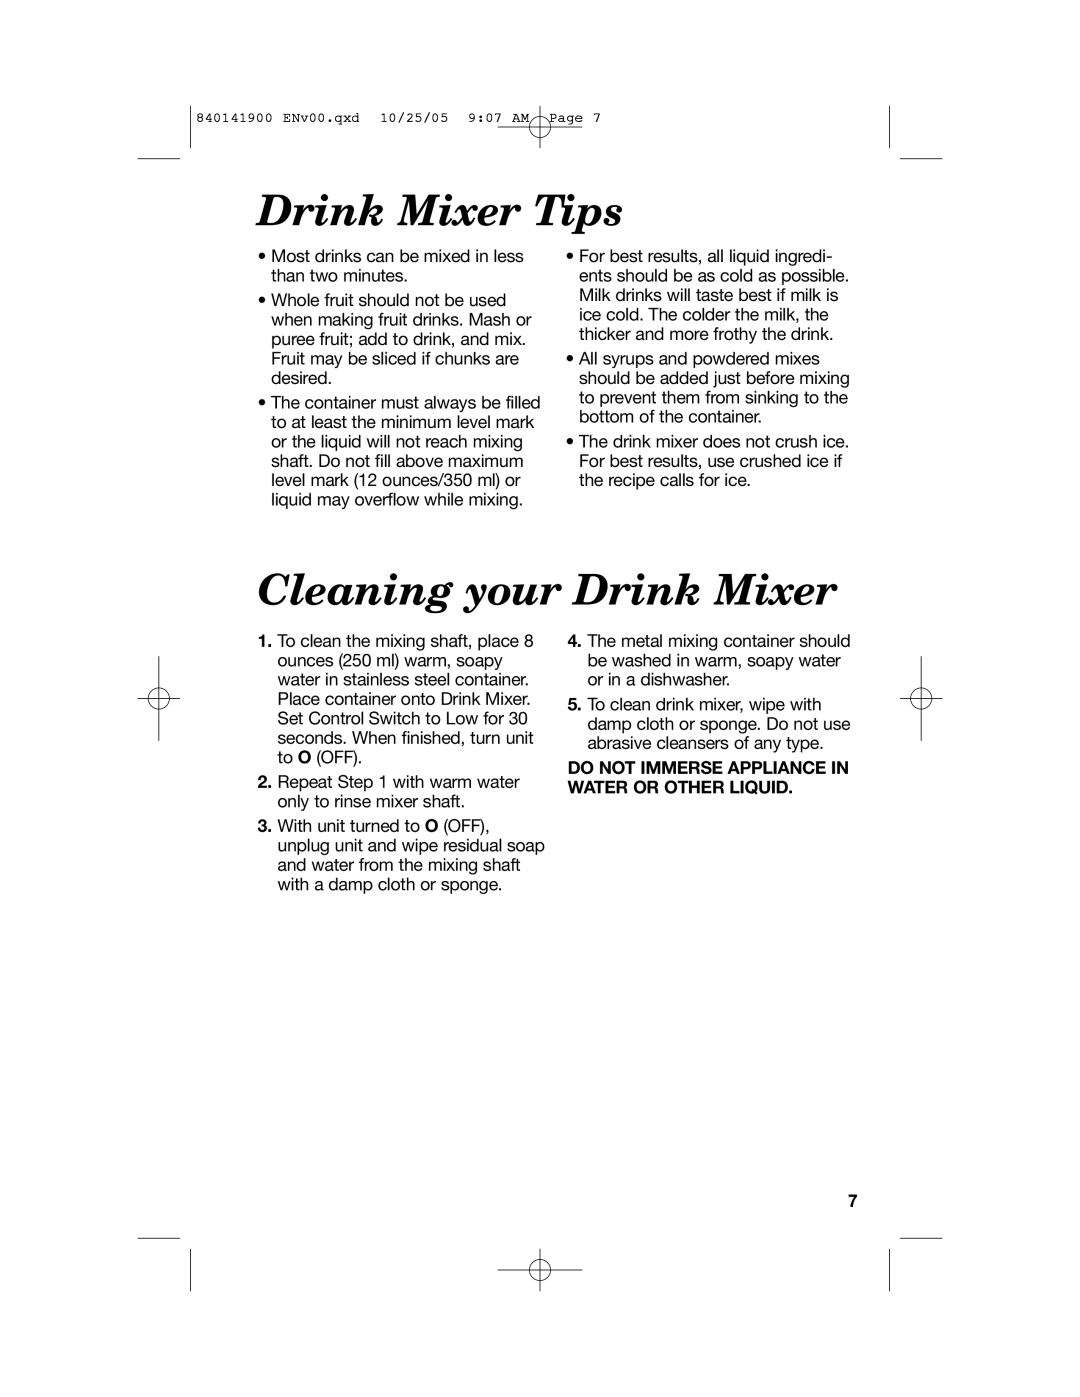 Hamilton Beach 840141900 Drink Mixer Tips, Cleaning your Drink Mixer, Do Not Immerse Appliance In Water Or Other Liquid 